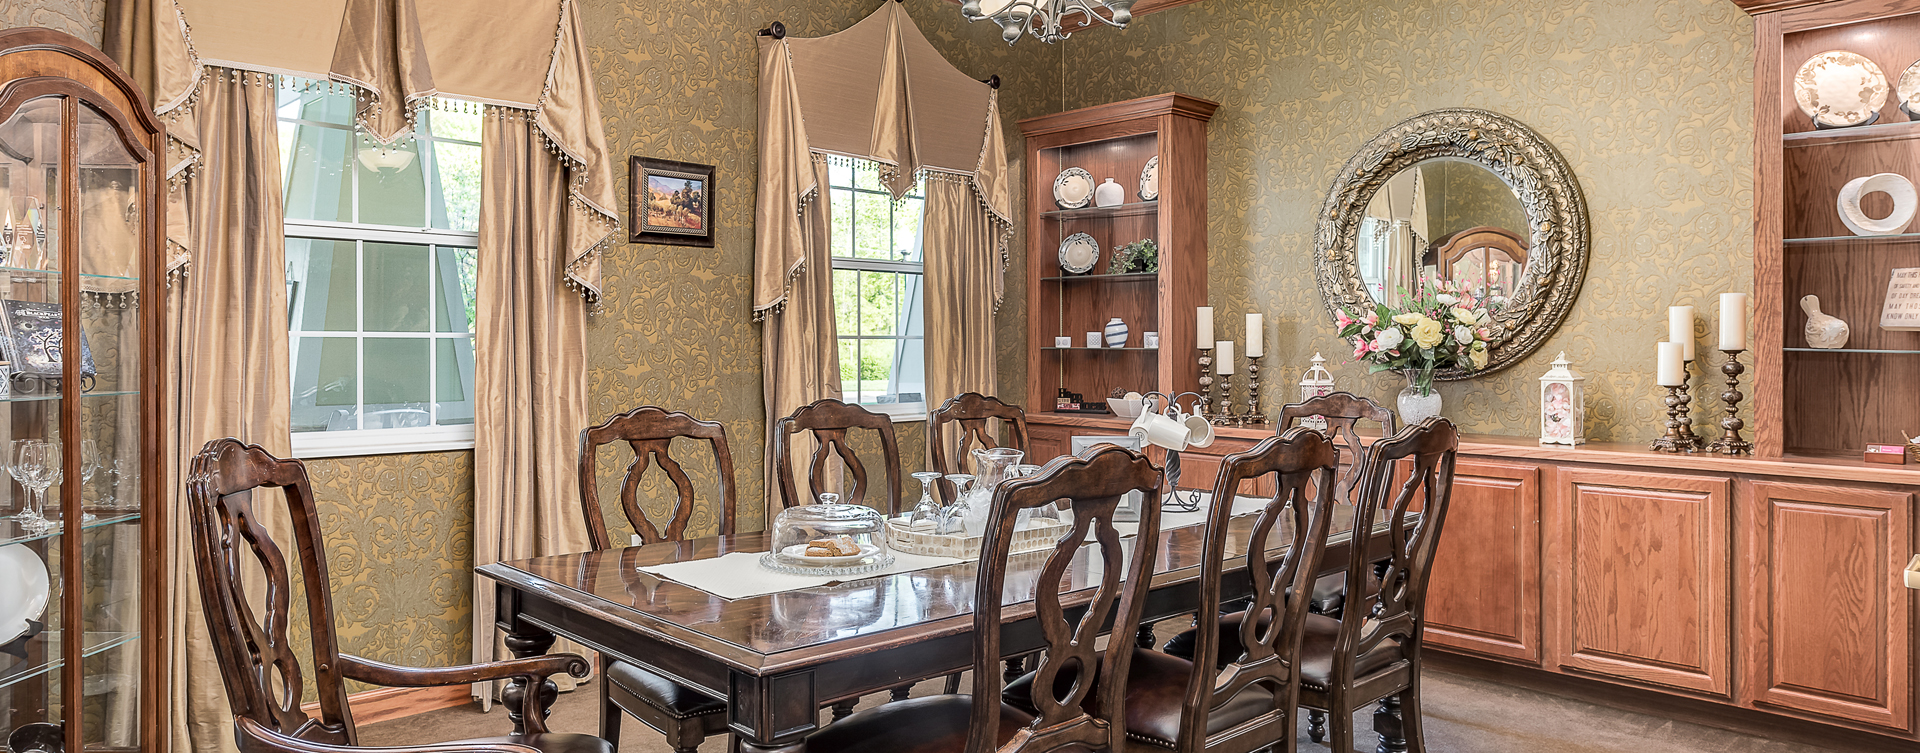 Celebrate special occasions in the private dining room at Bickford of Midland